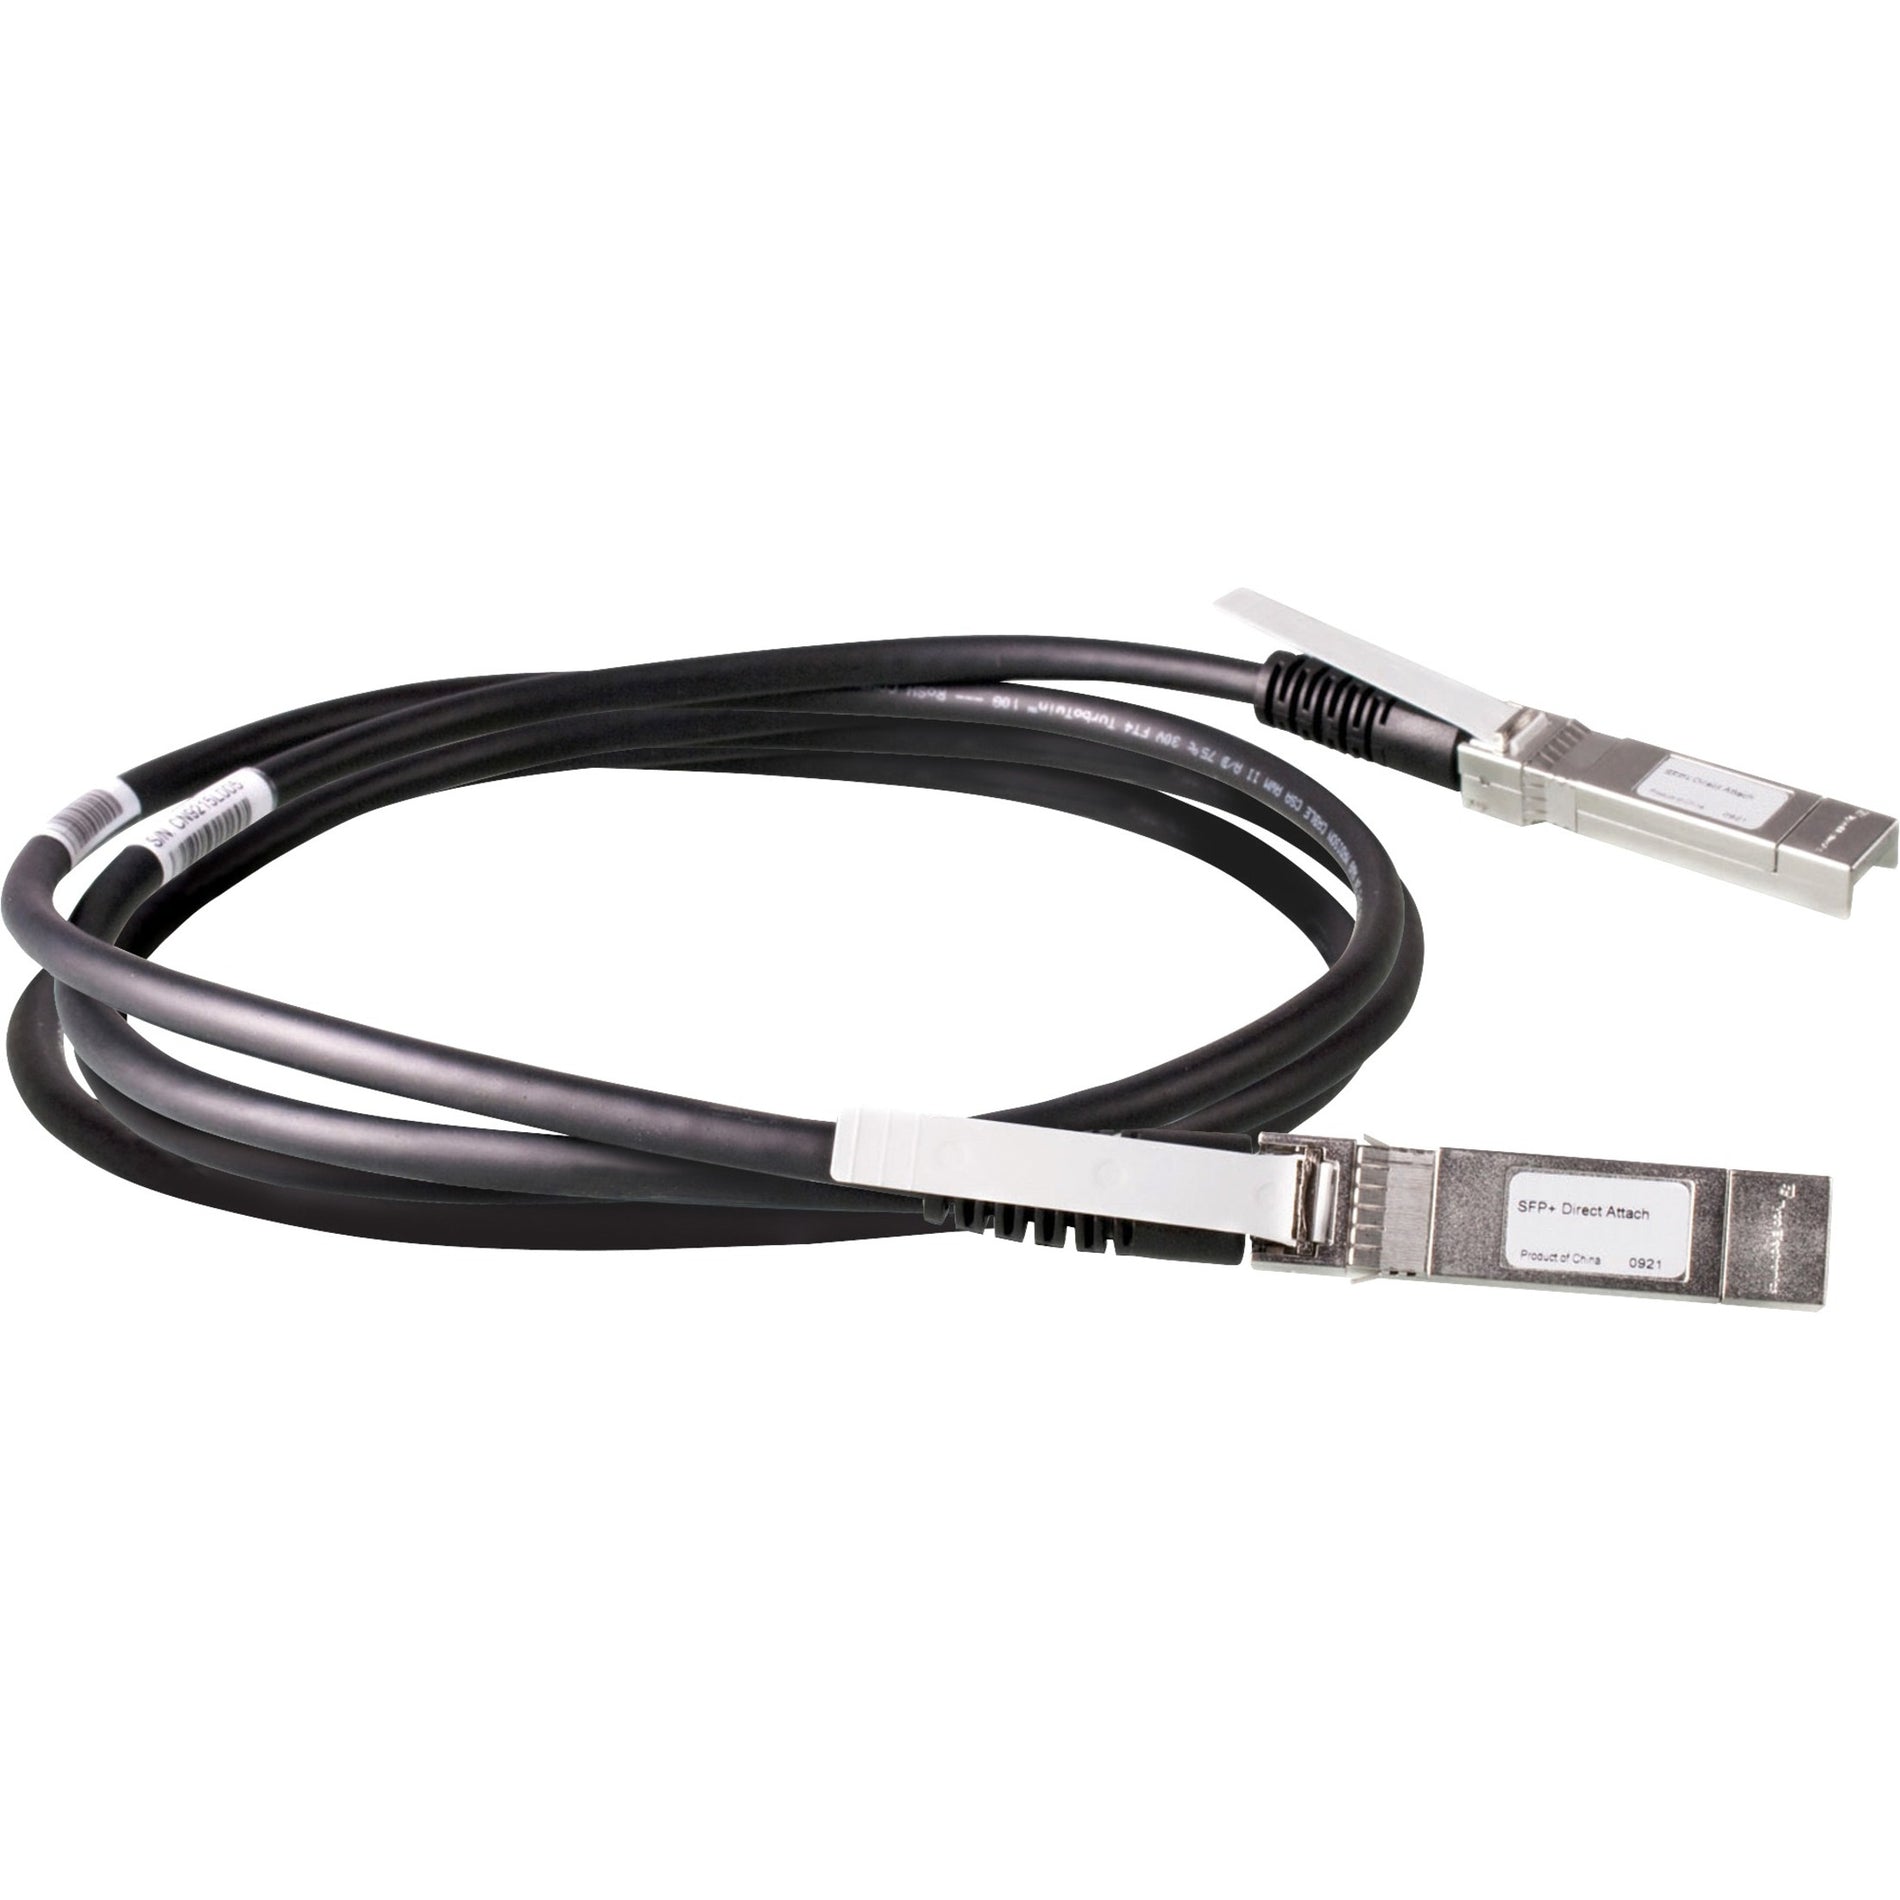 HPE  X240 10G SFP+ to SFP+ 3m Direct Attach Copper Cable (JD097C)